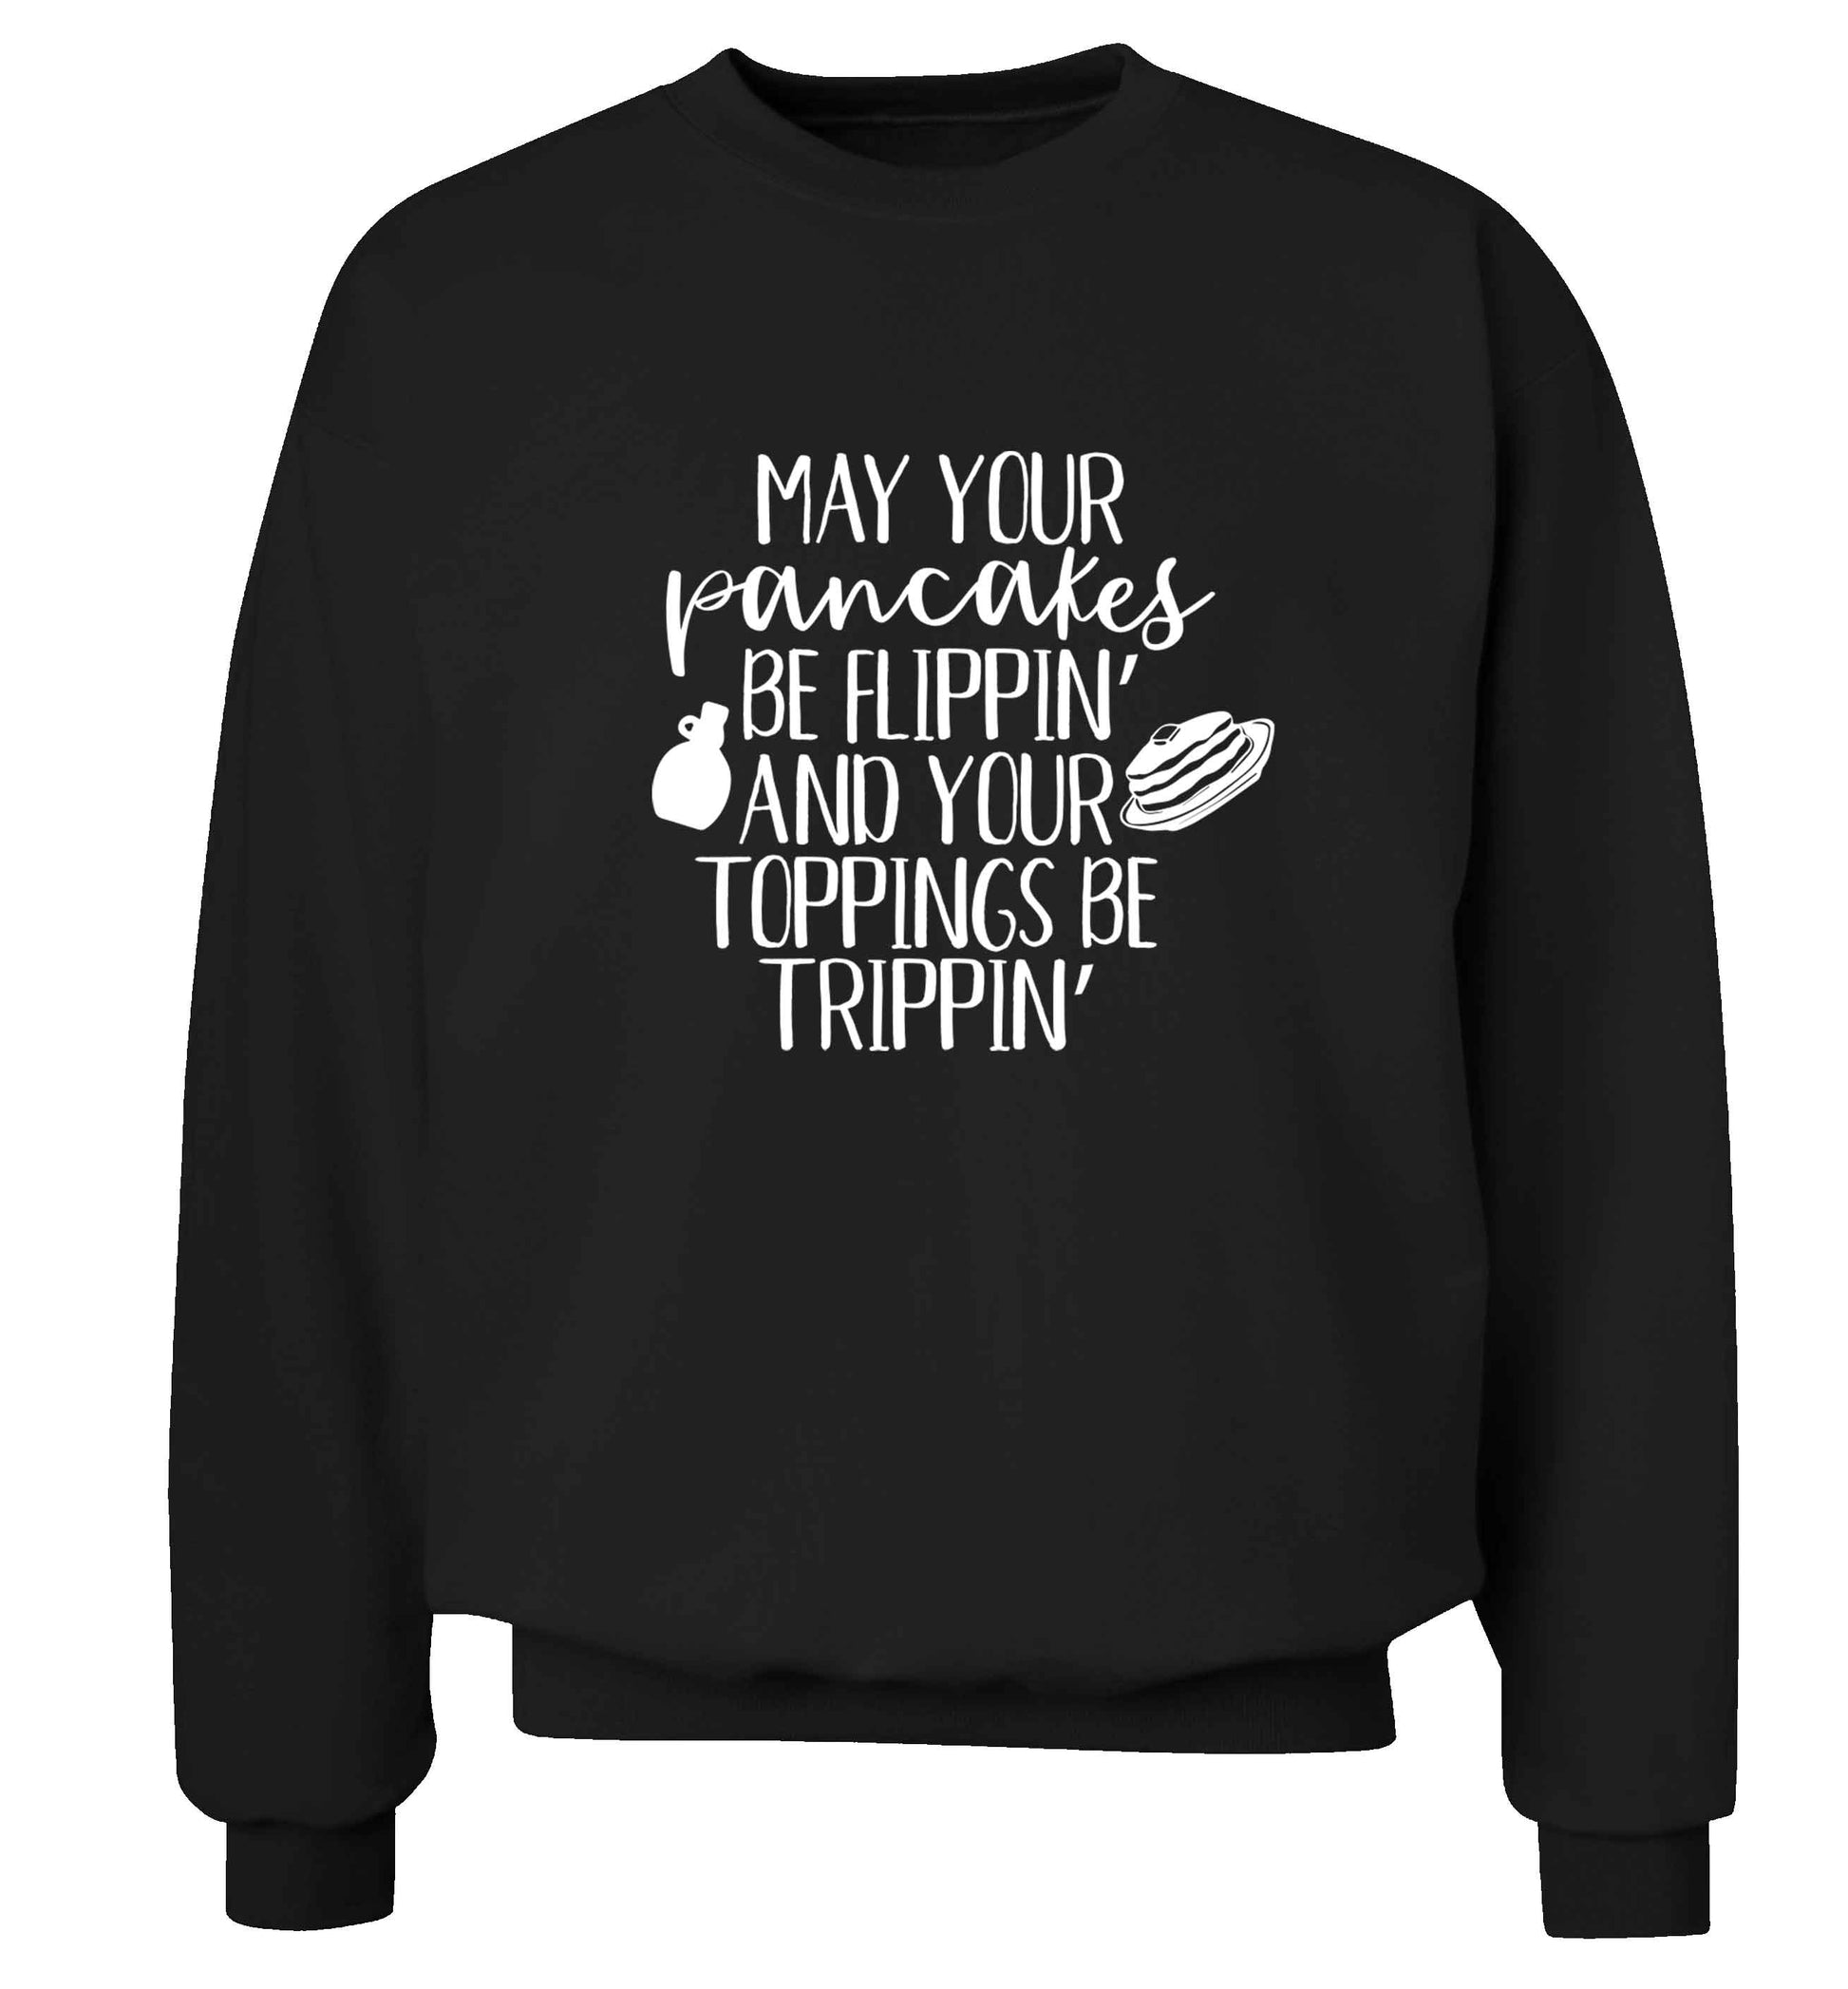 May your pancakes be flippin' and your toppings be trippin' adult's unisex black sweater 2XL